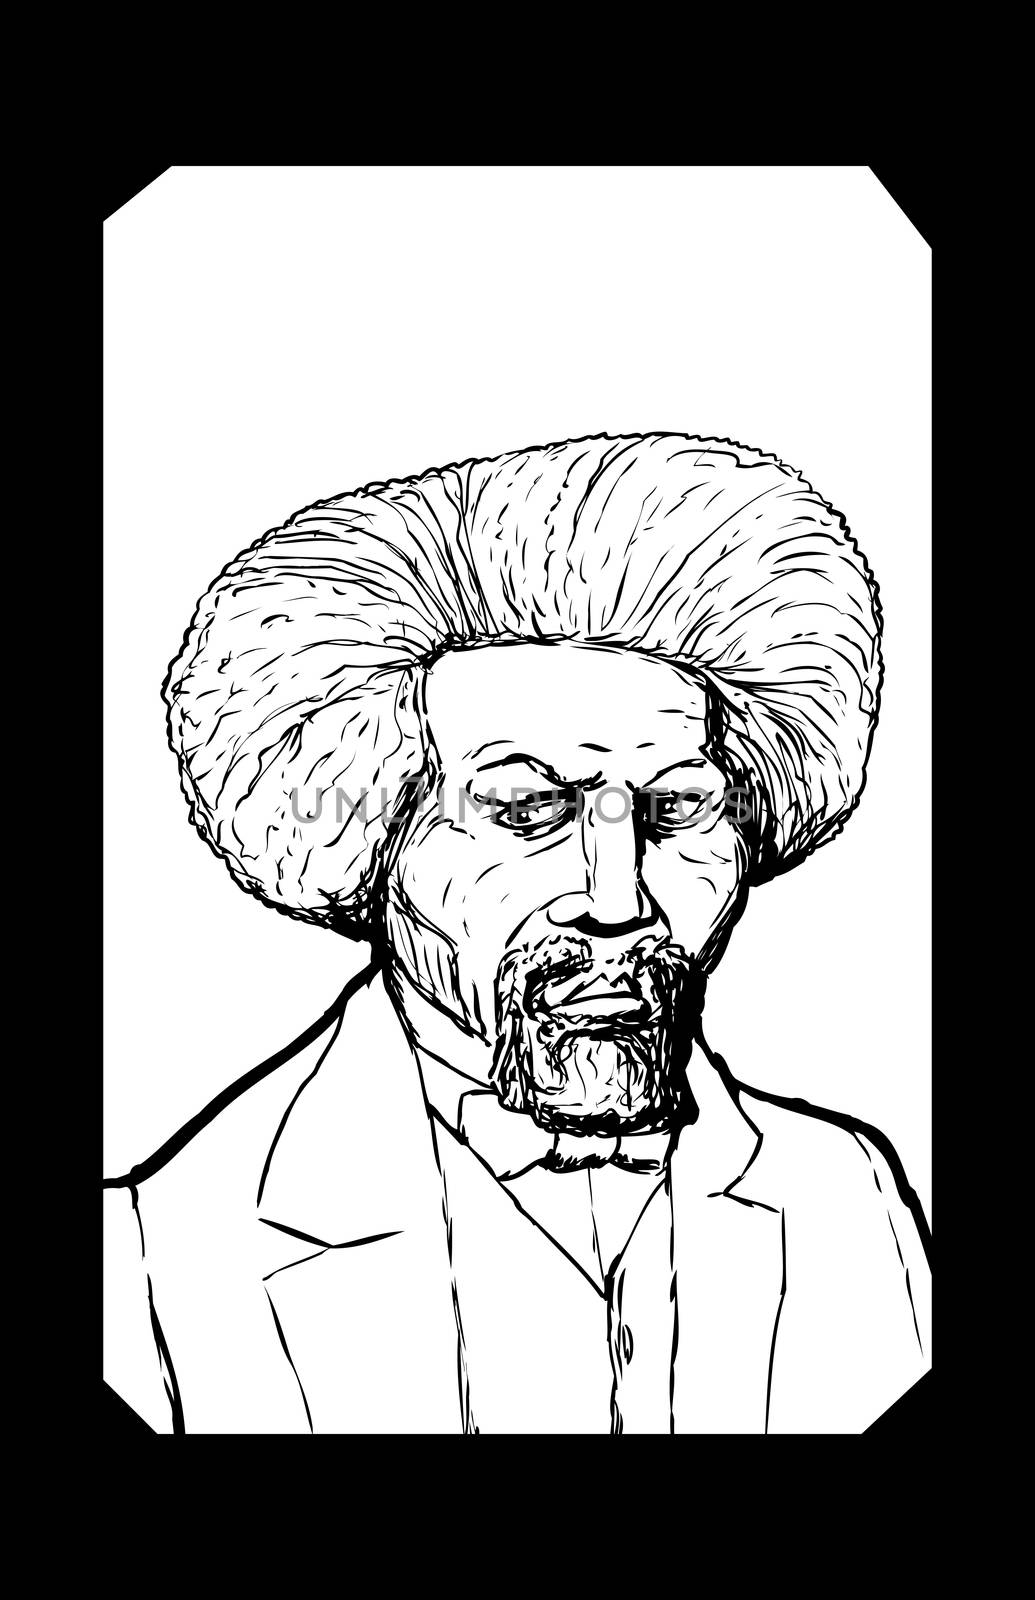 Outlined Portrait of Frederick Douglass with Frame by TheBlackRhino